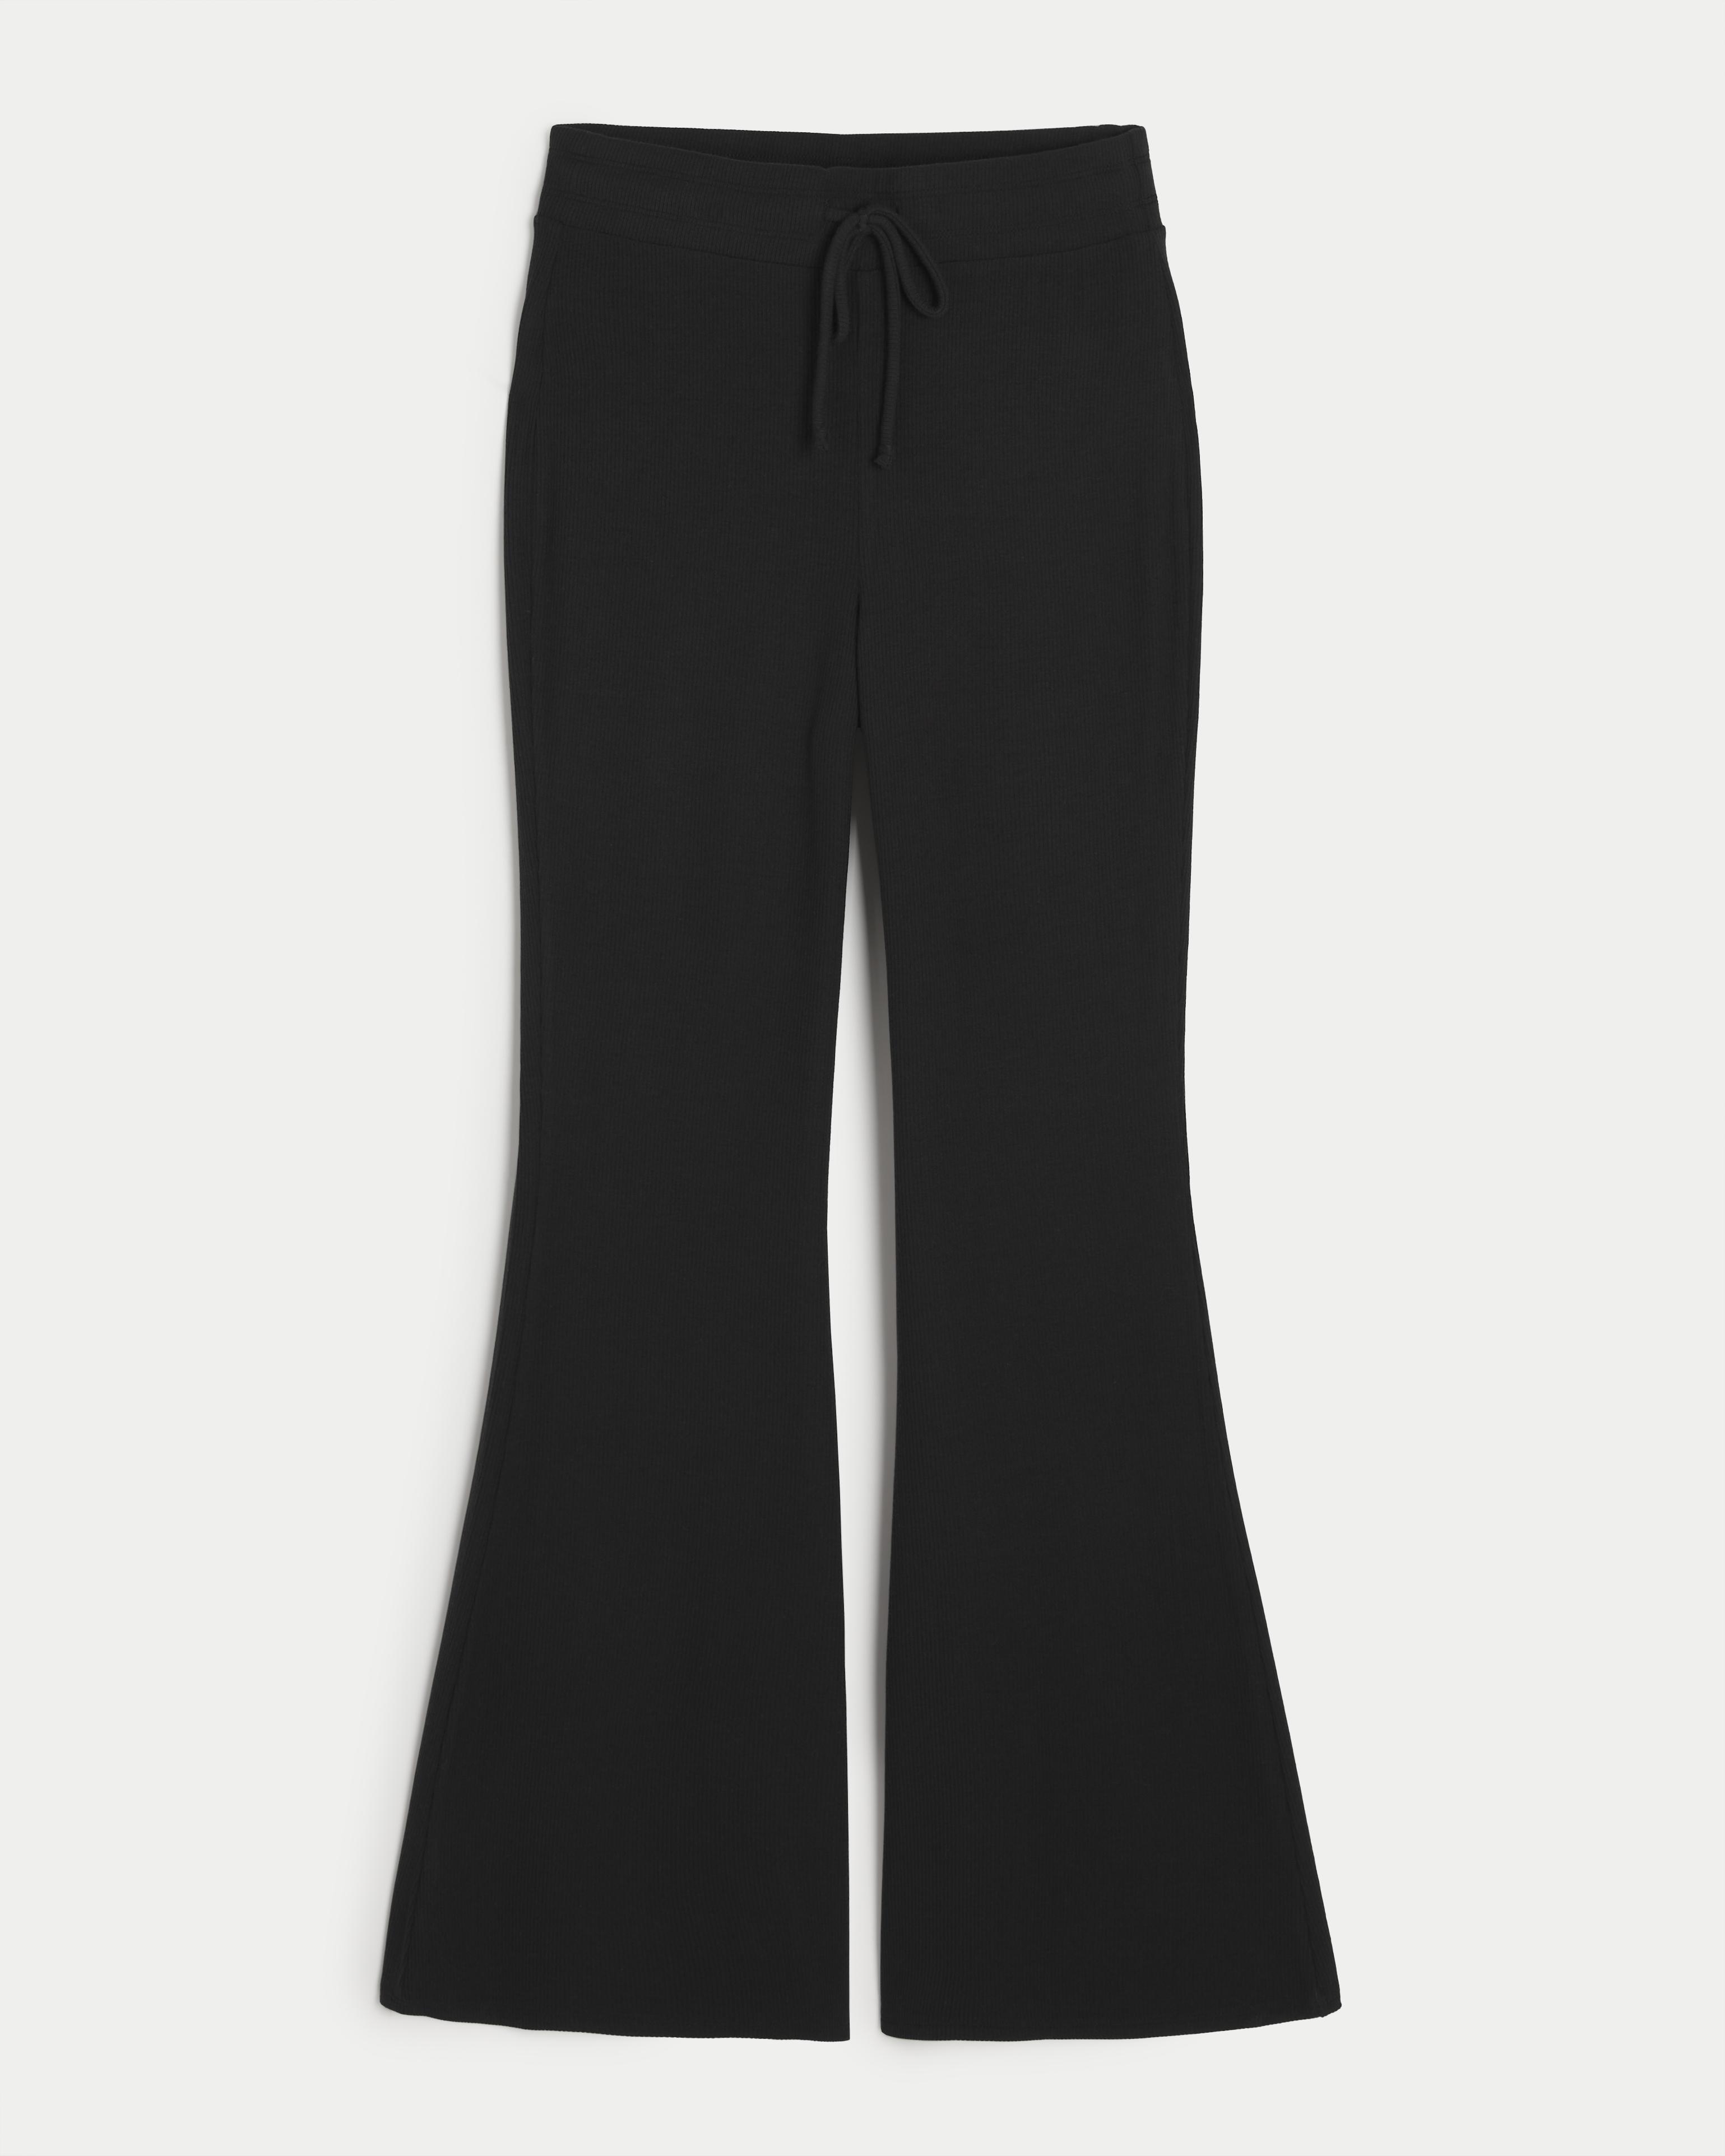 Hollister Gilly Hicks Jersey Rib Flare Pants in Black